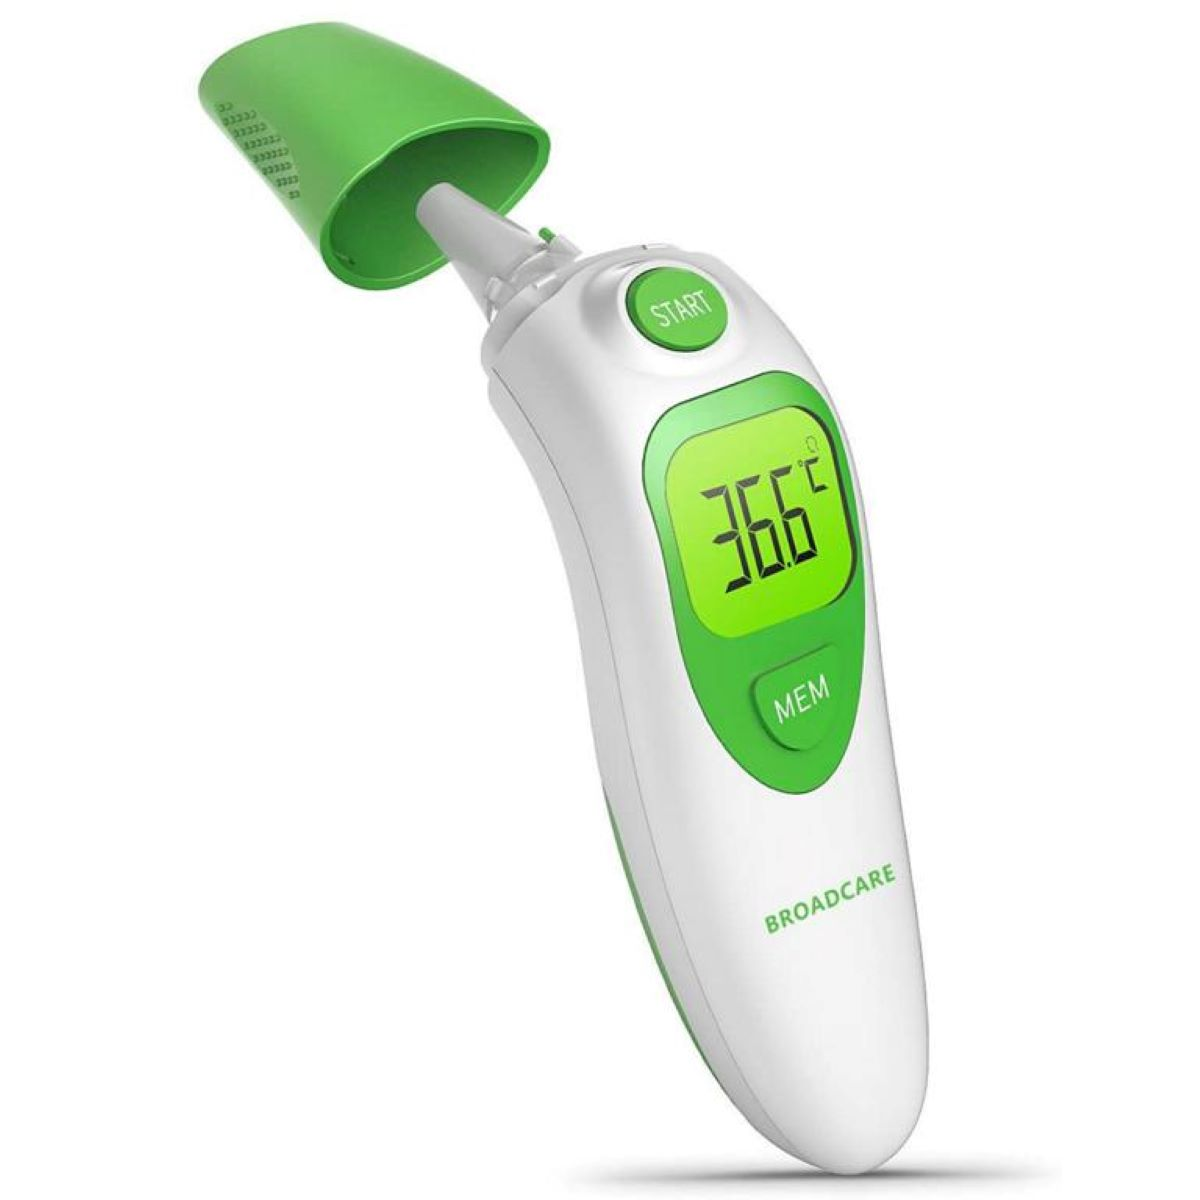 BROADCARE BC-2013/bc-2003 Thermometer der (Messart: an Stirn)